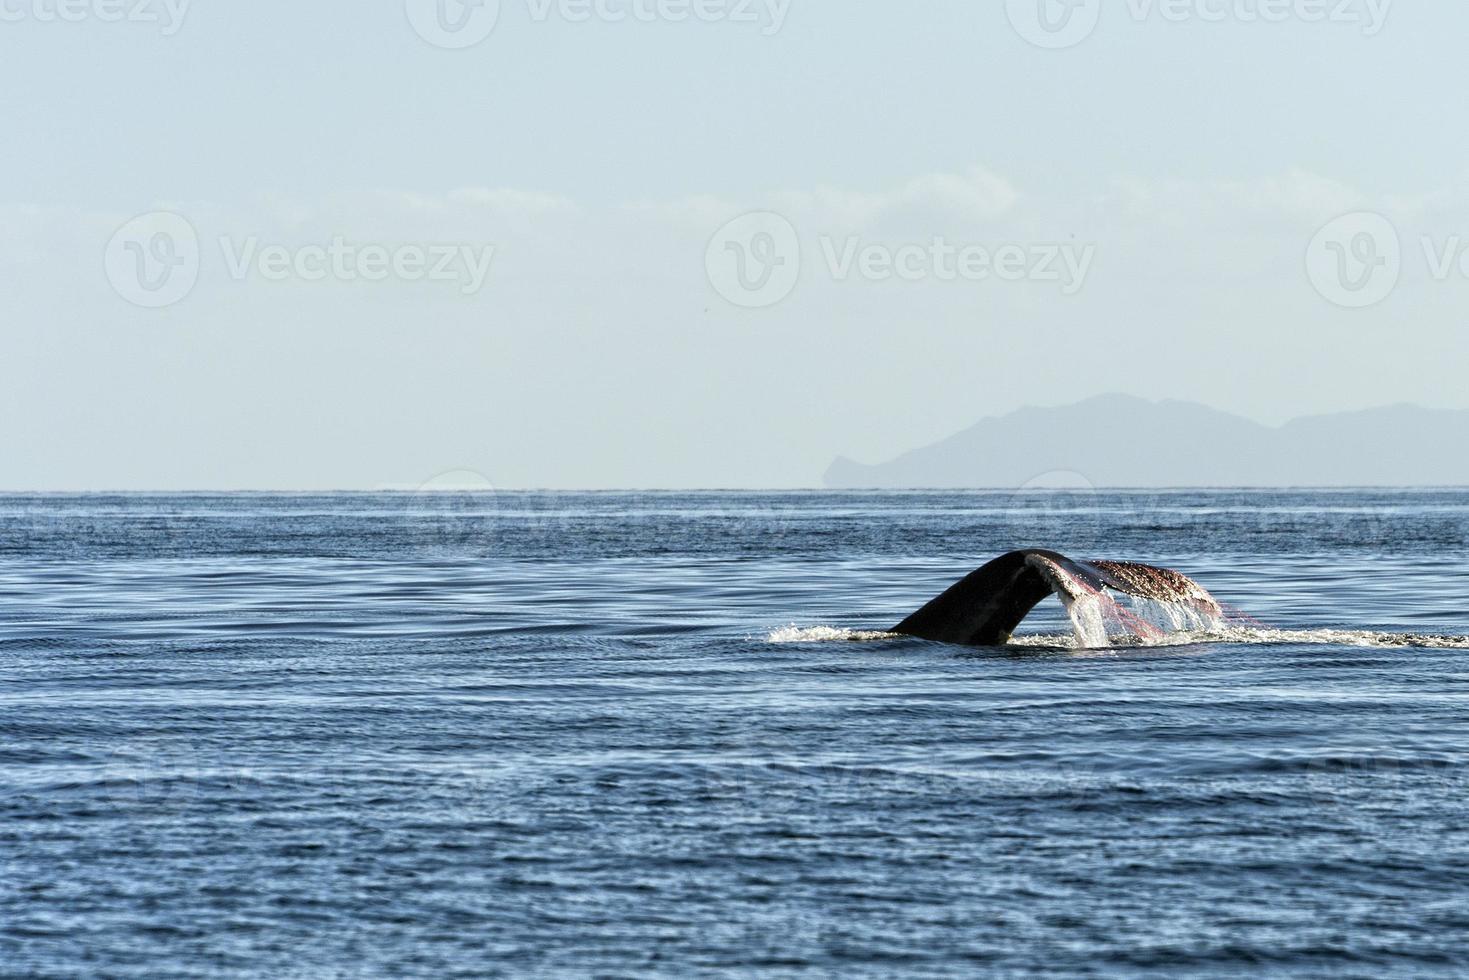 Humpback whale tail trapped in fishing net photo